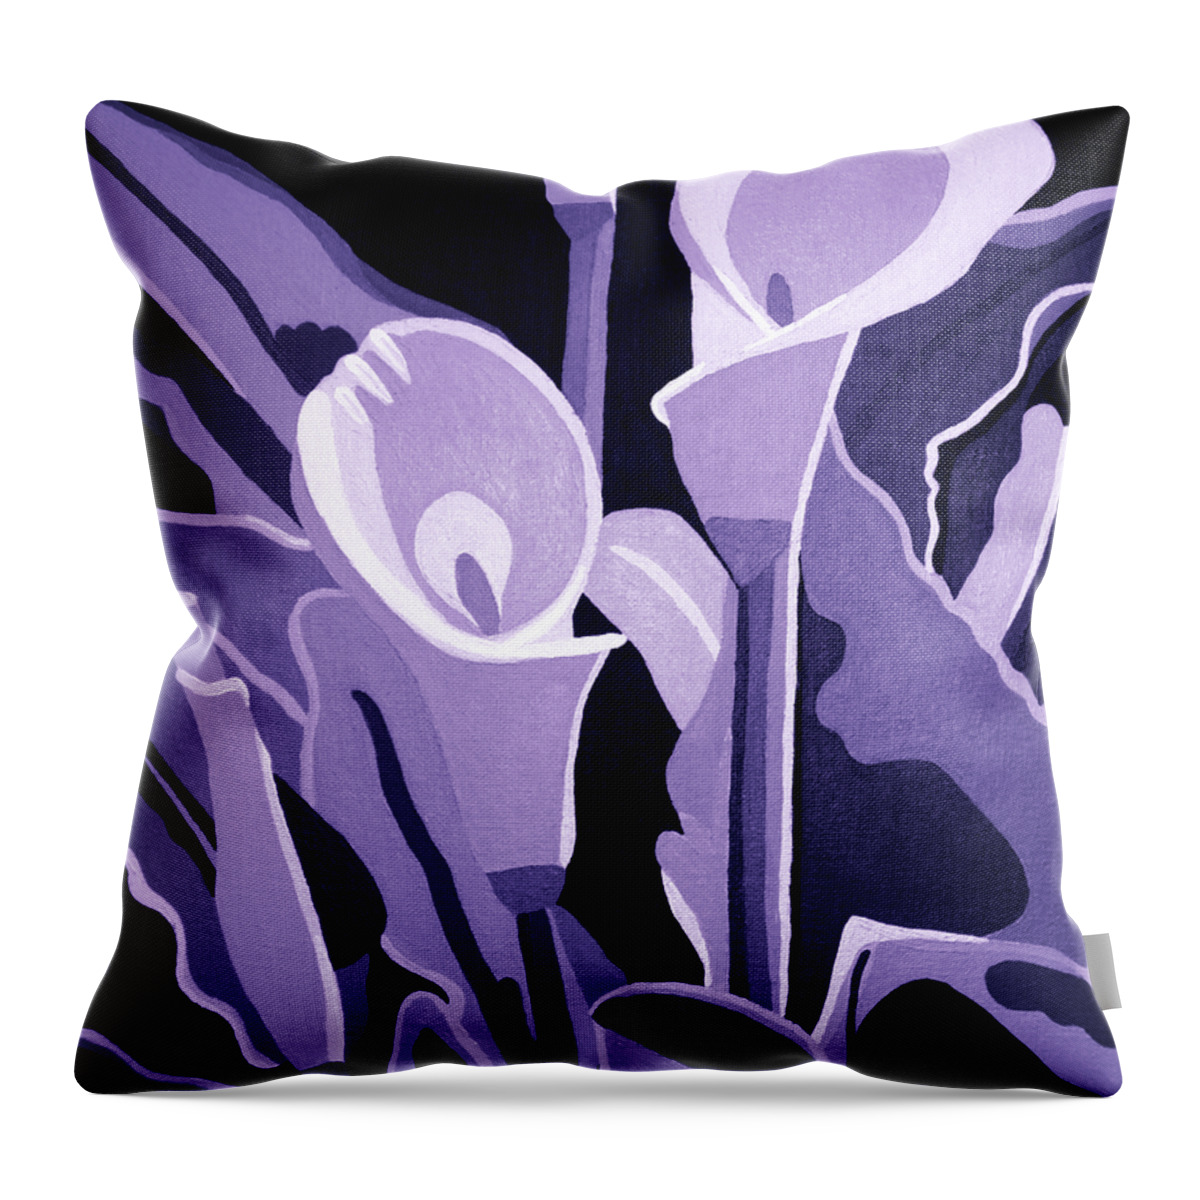 Calla Lillies Throw Pillow featuring the painting Calla Lillies Lavender by Angelina Tamez